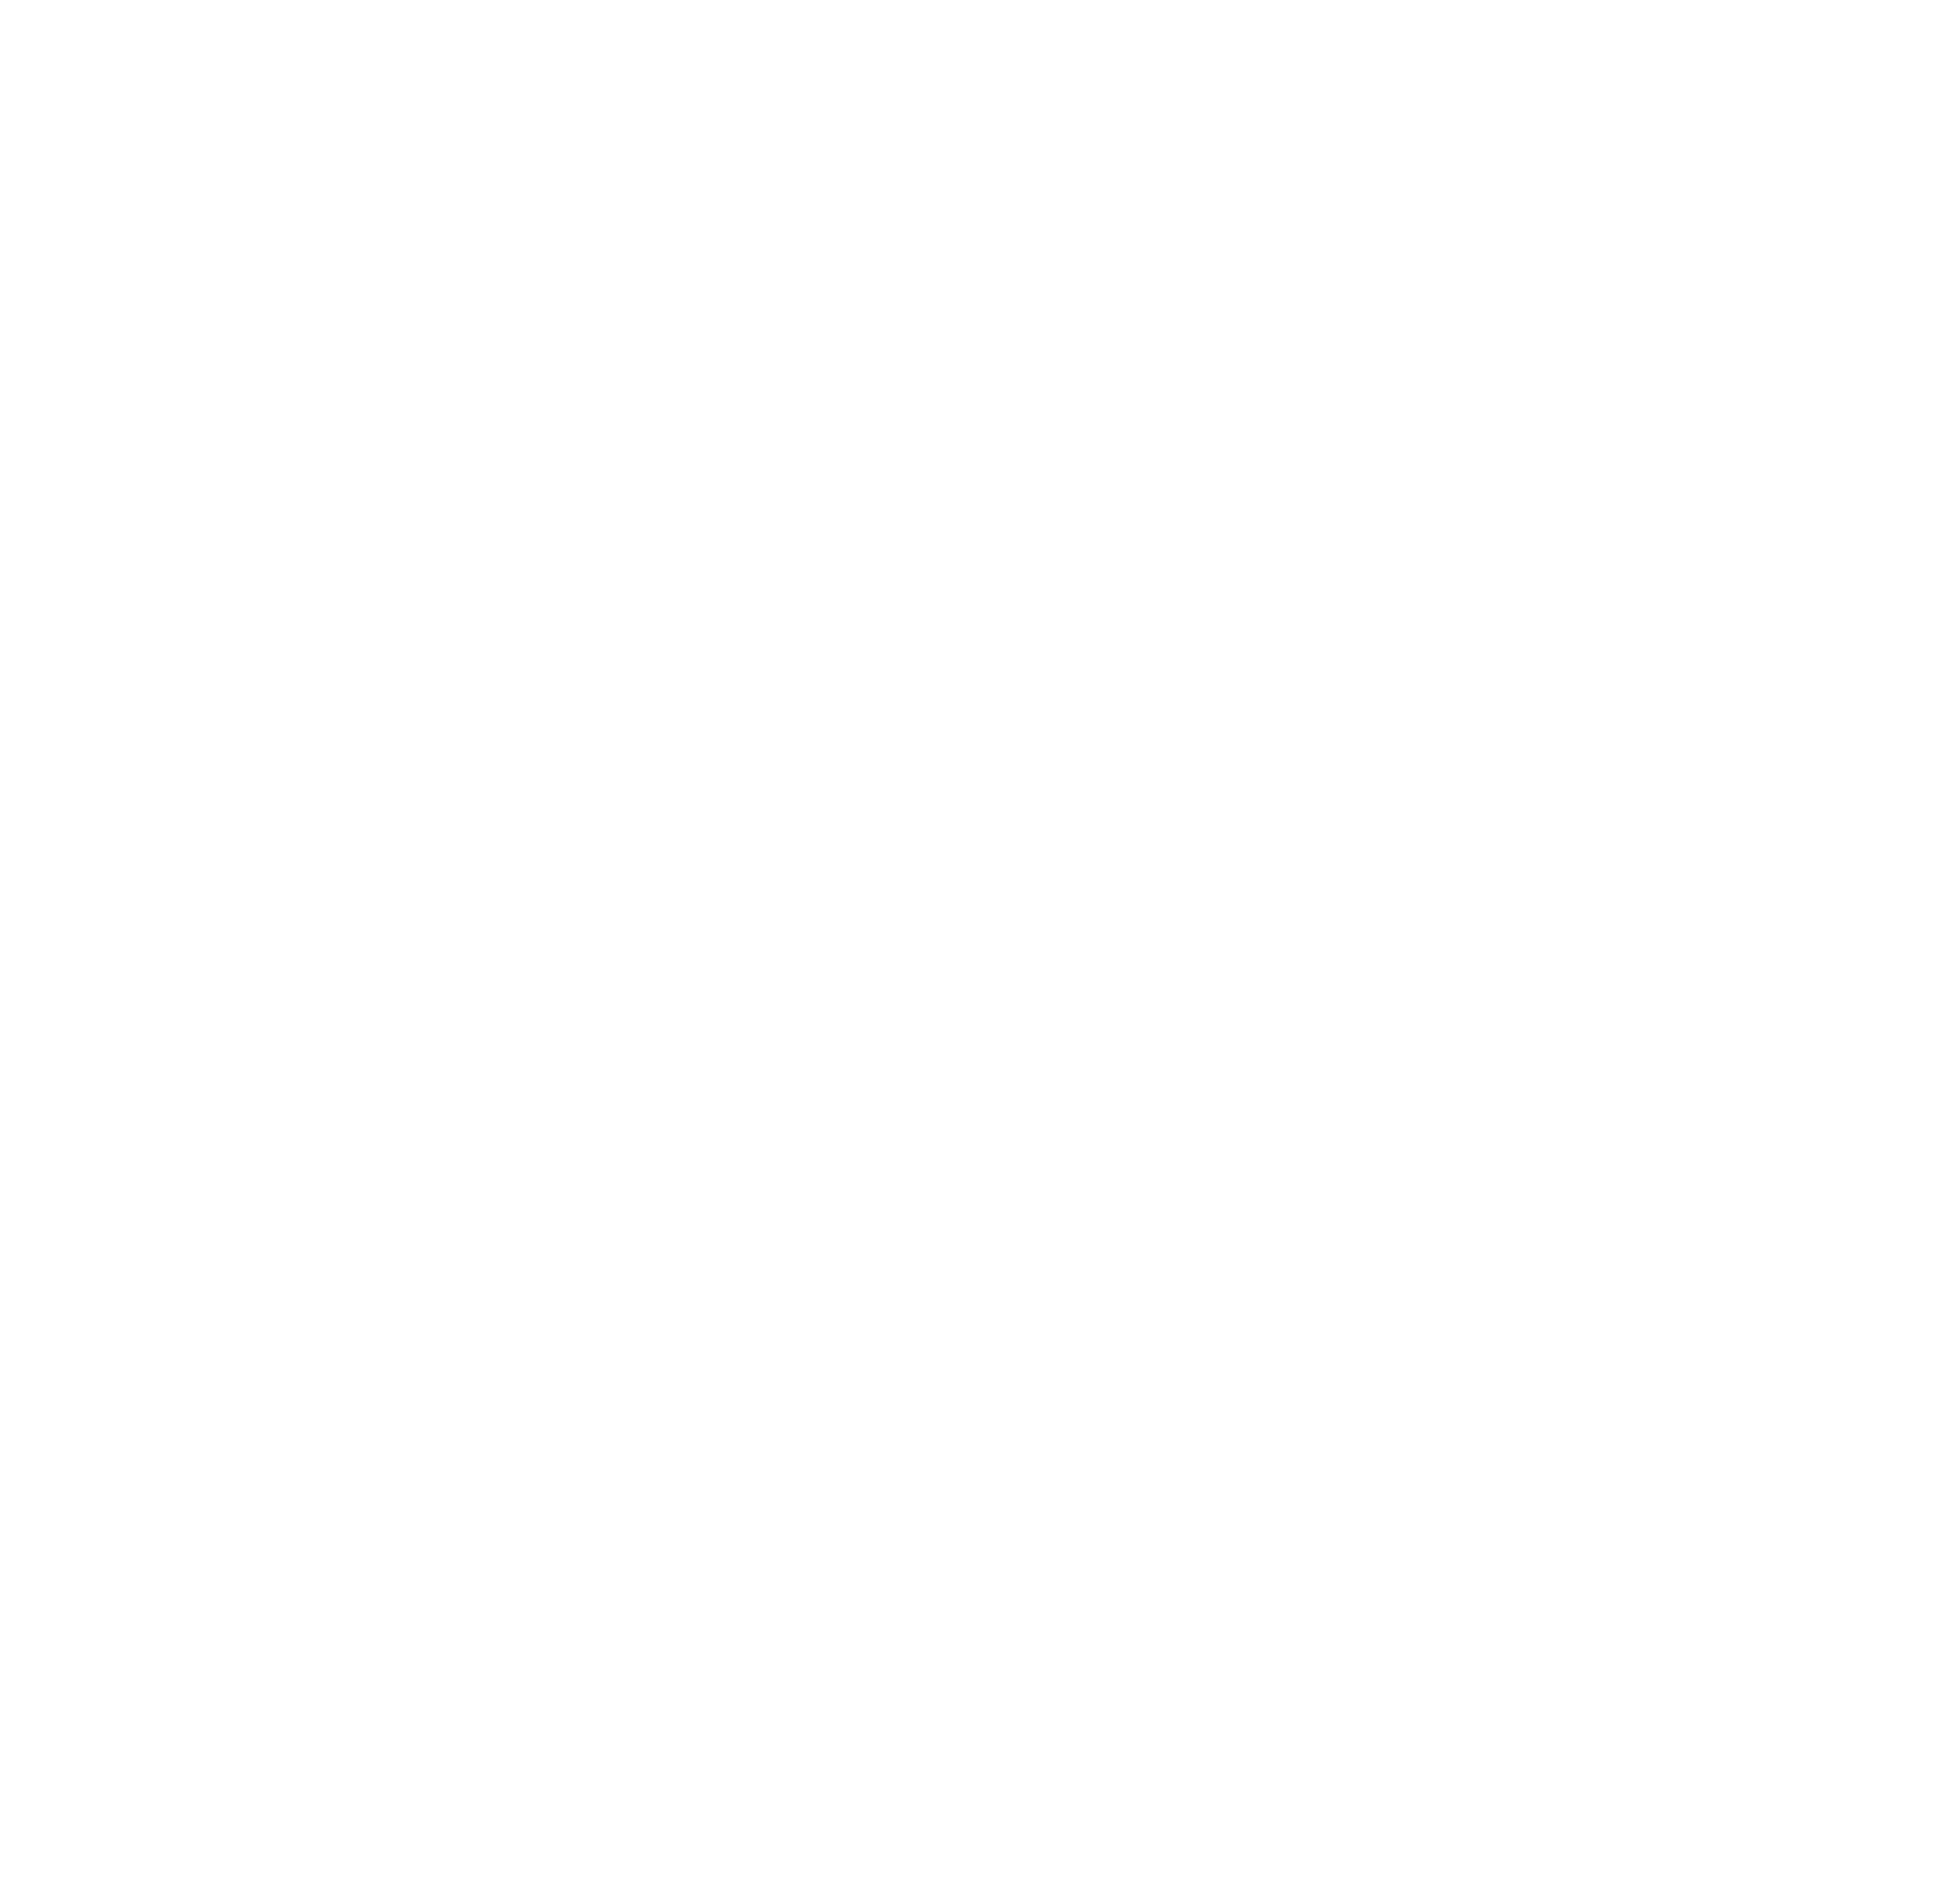 two people running in different directions with arrows